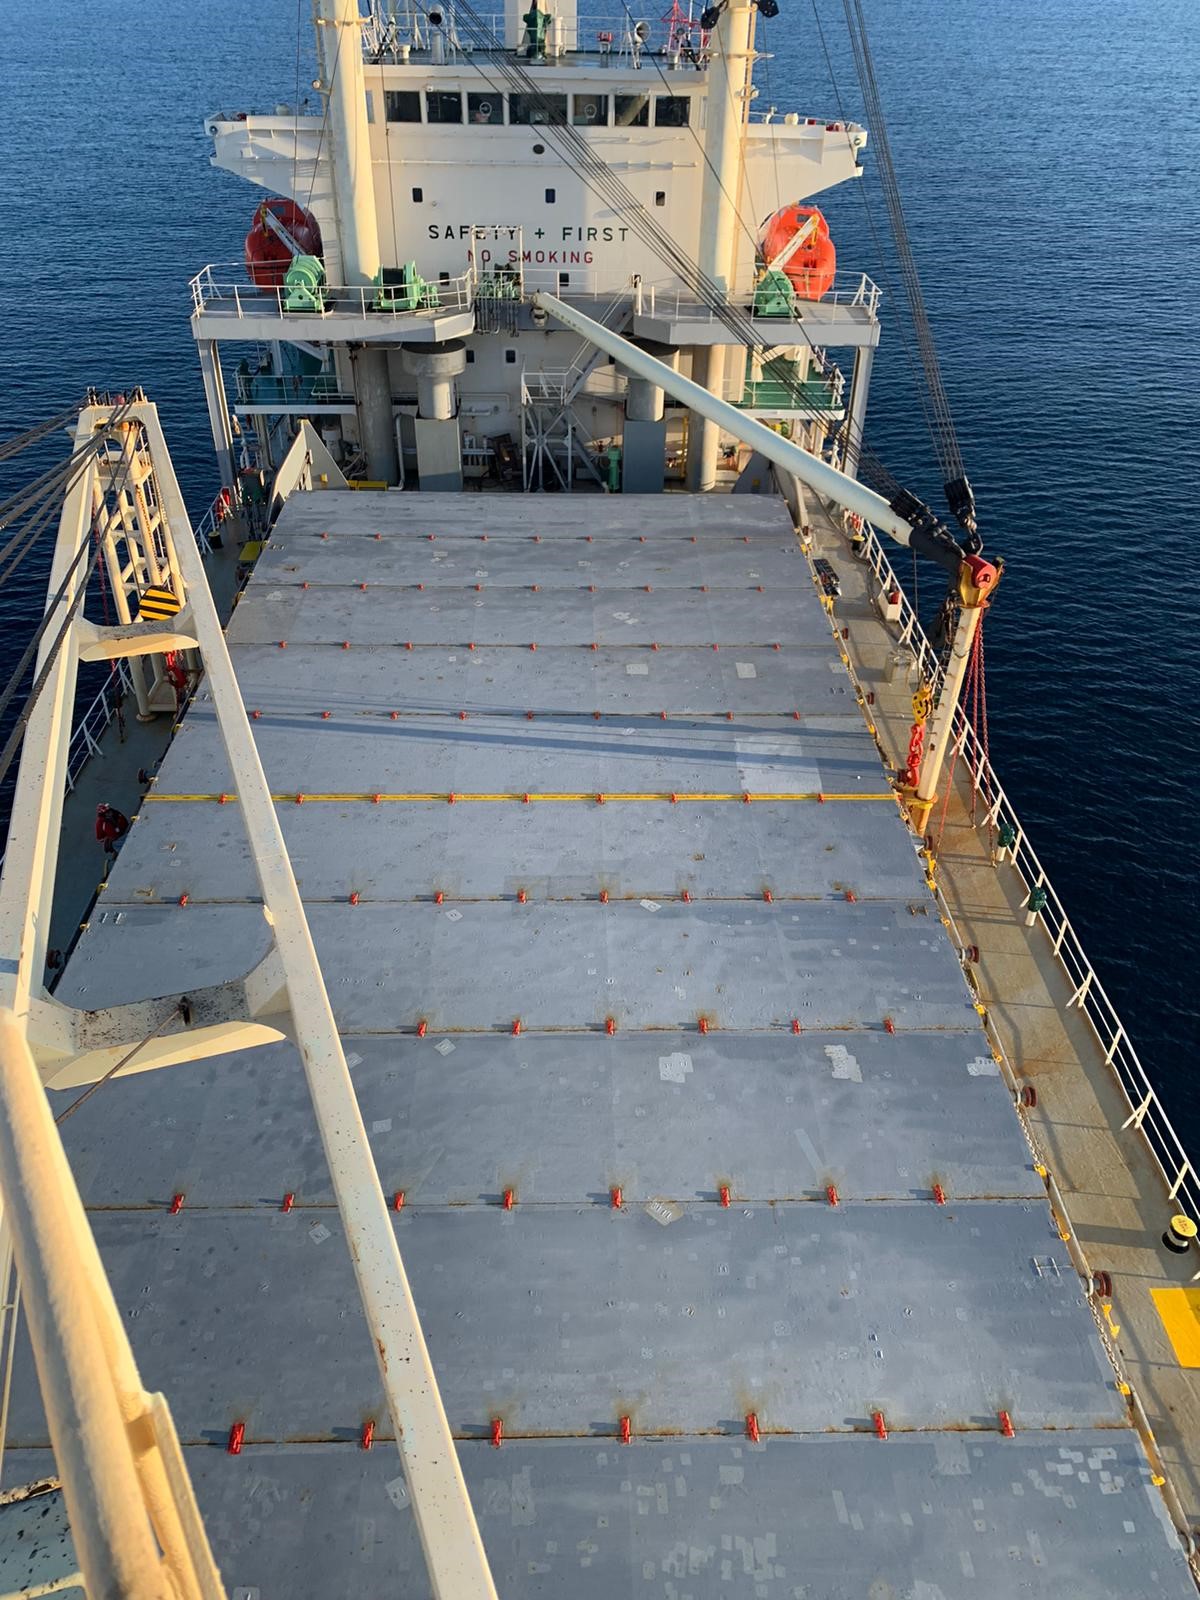 Unified Command reports no immediate risk of fire aboard M/V Genius Star XI  > United States Coast Guard News > Press Releases